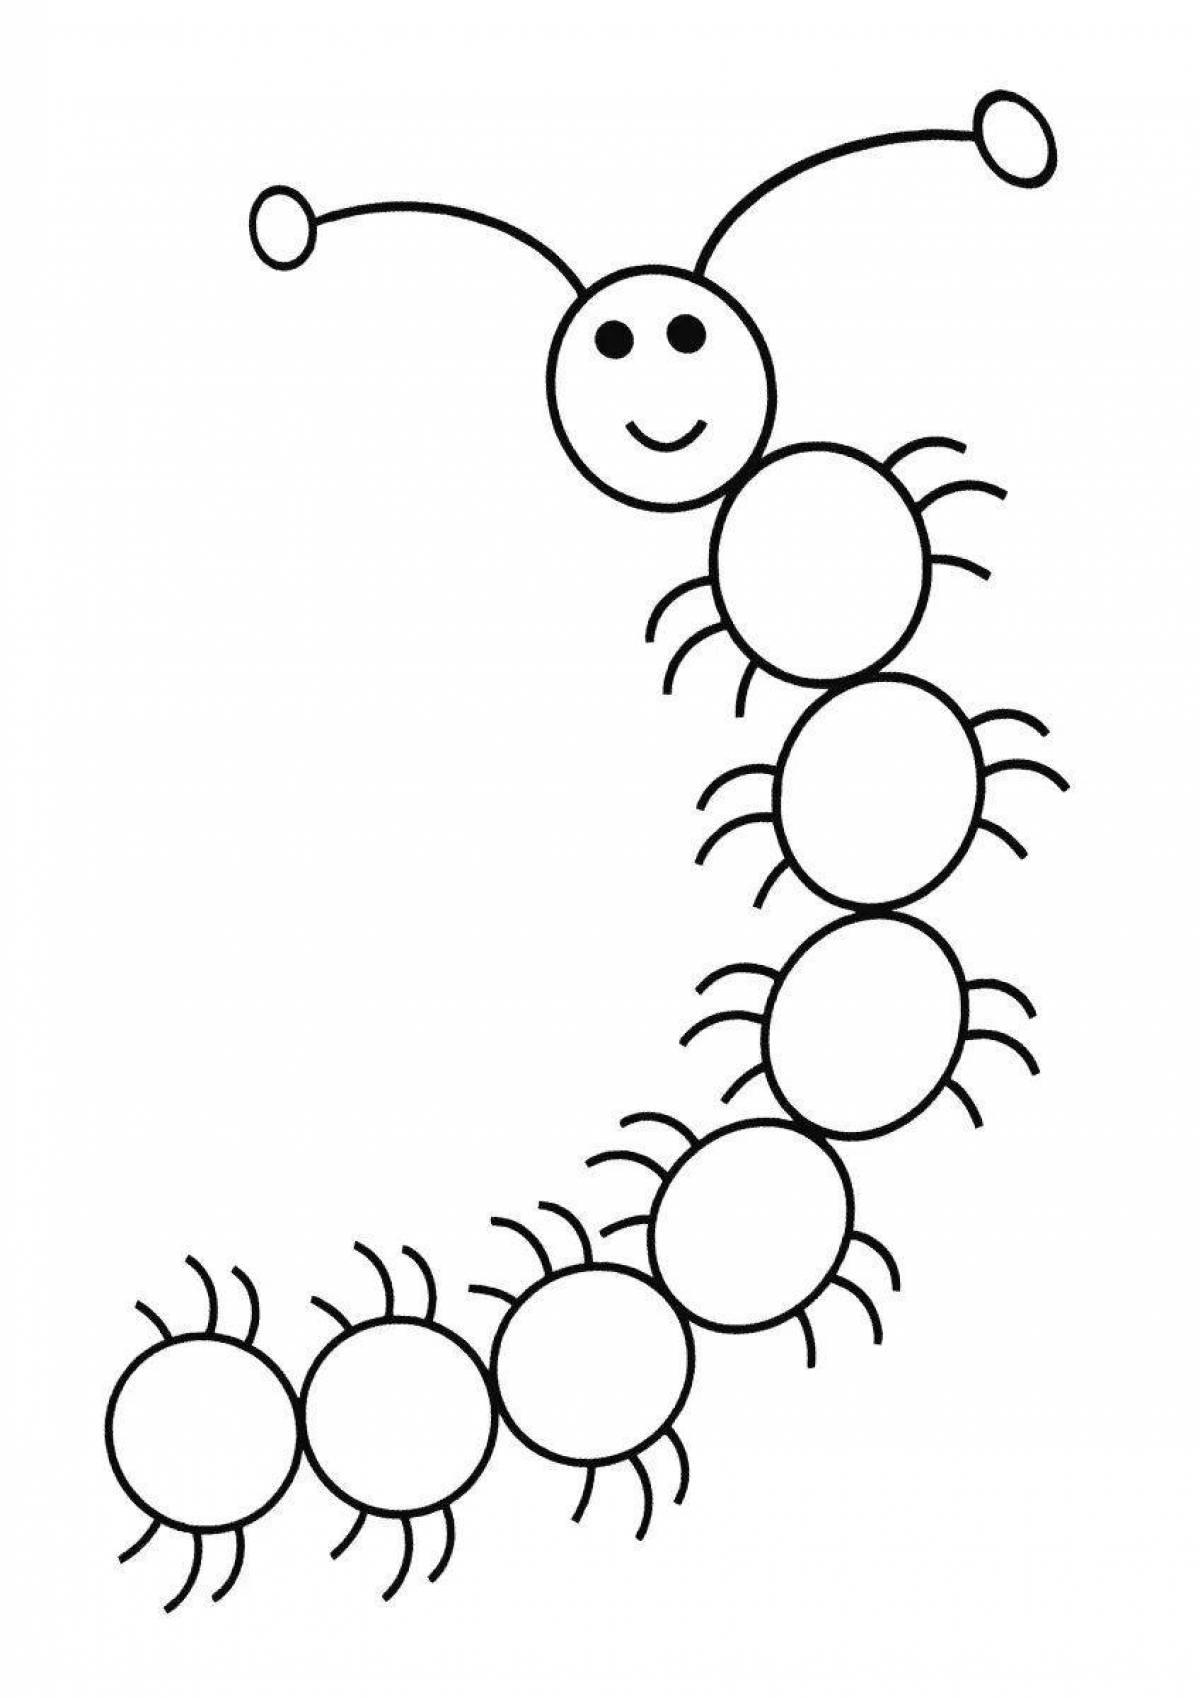 Coloured centipede coloring page